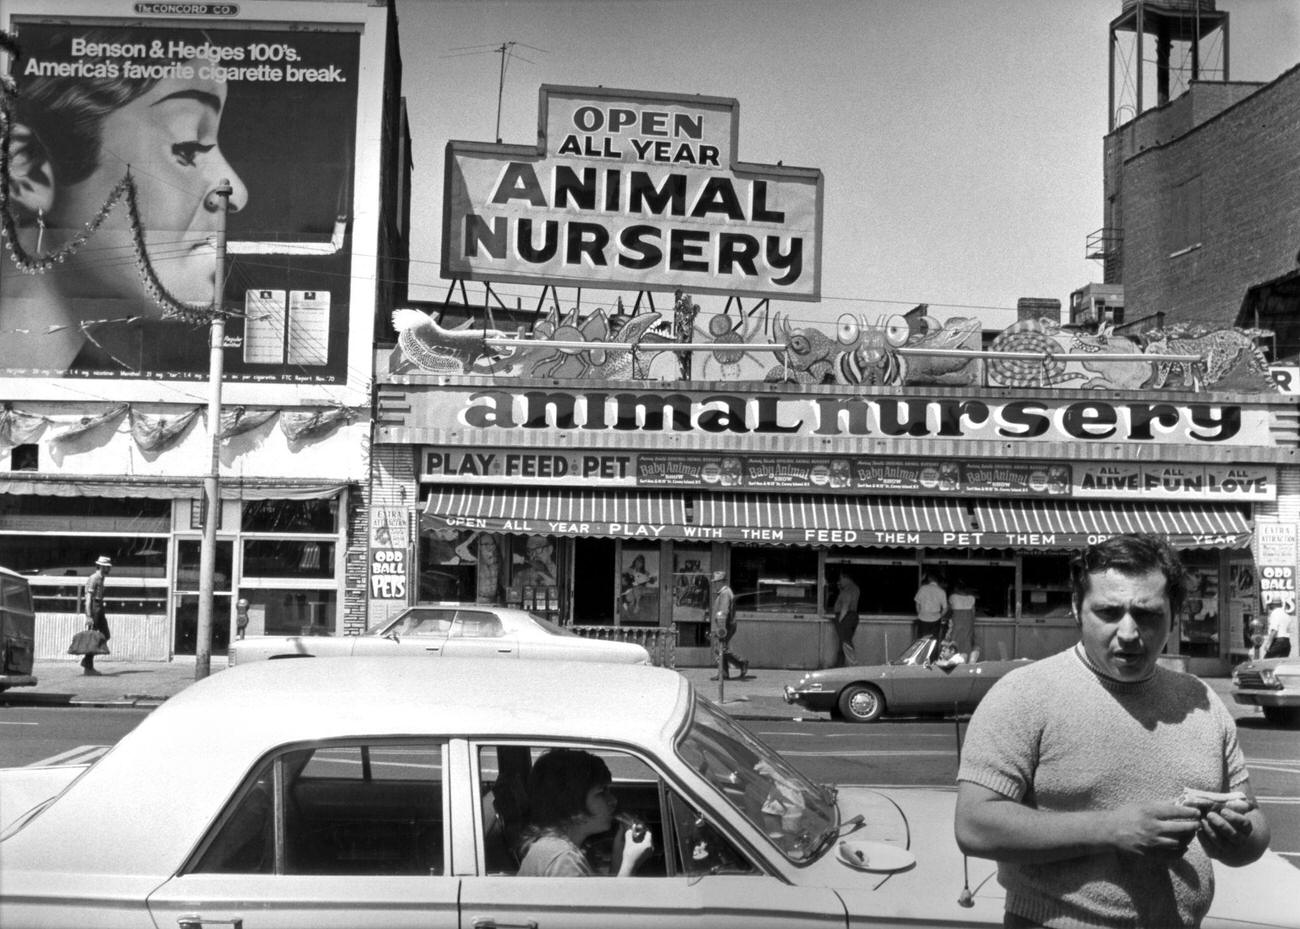 Man Eating Hot Dog In Front Of Parked Car, Coney Island, 1973